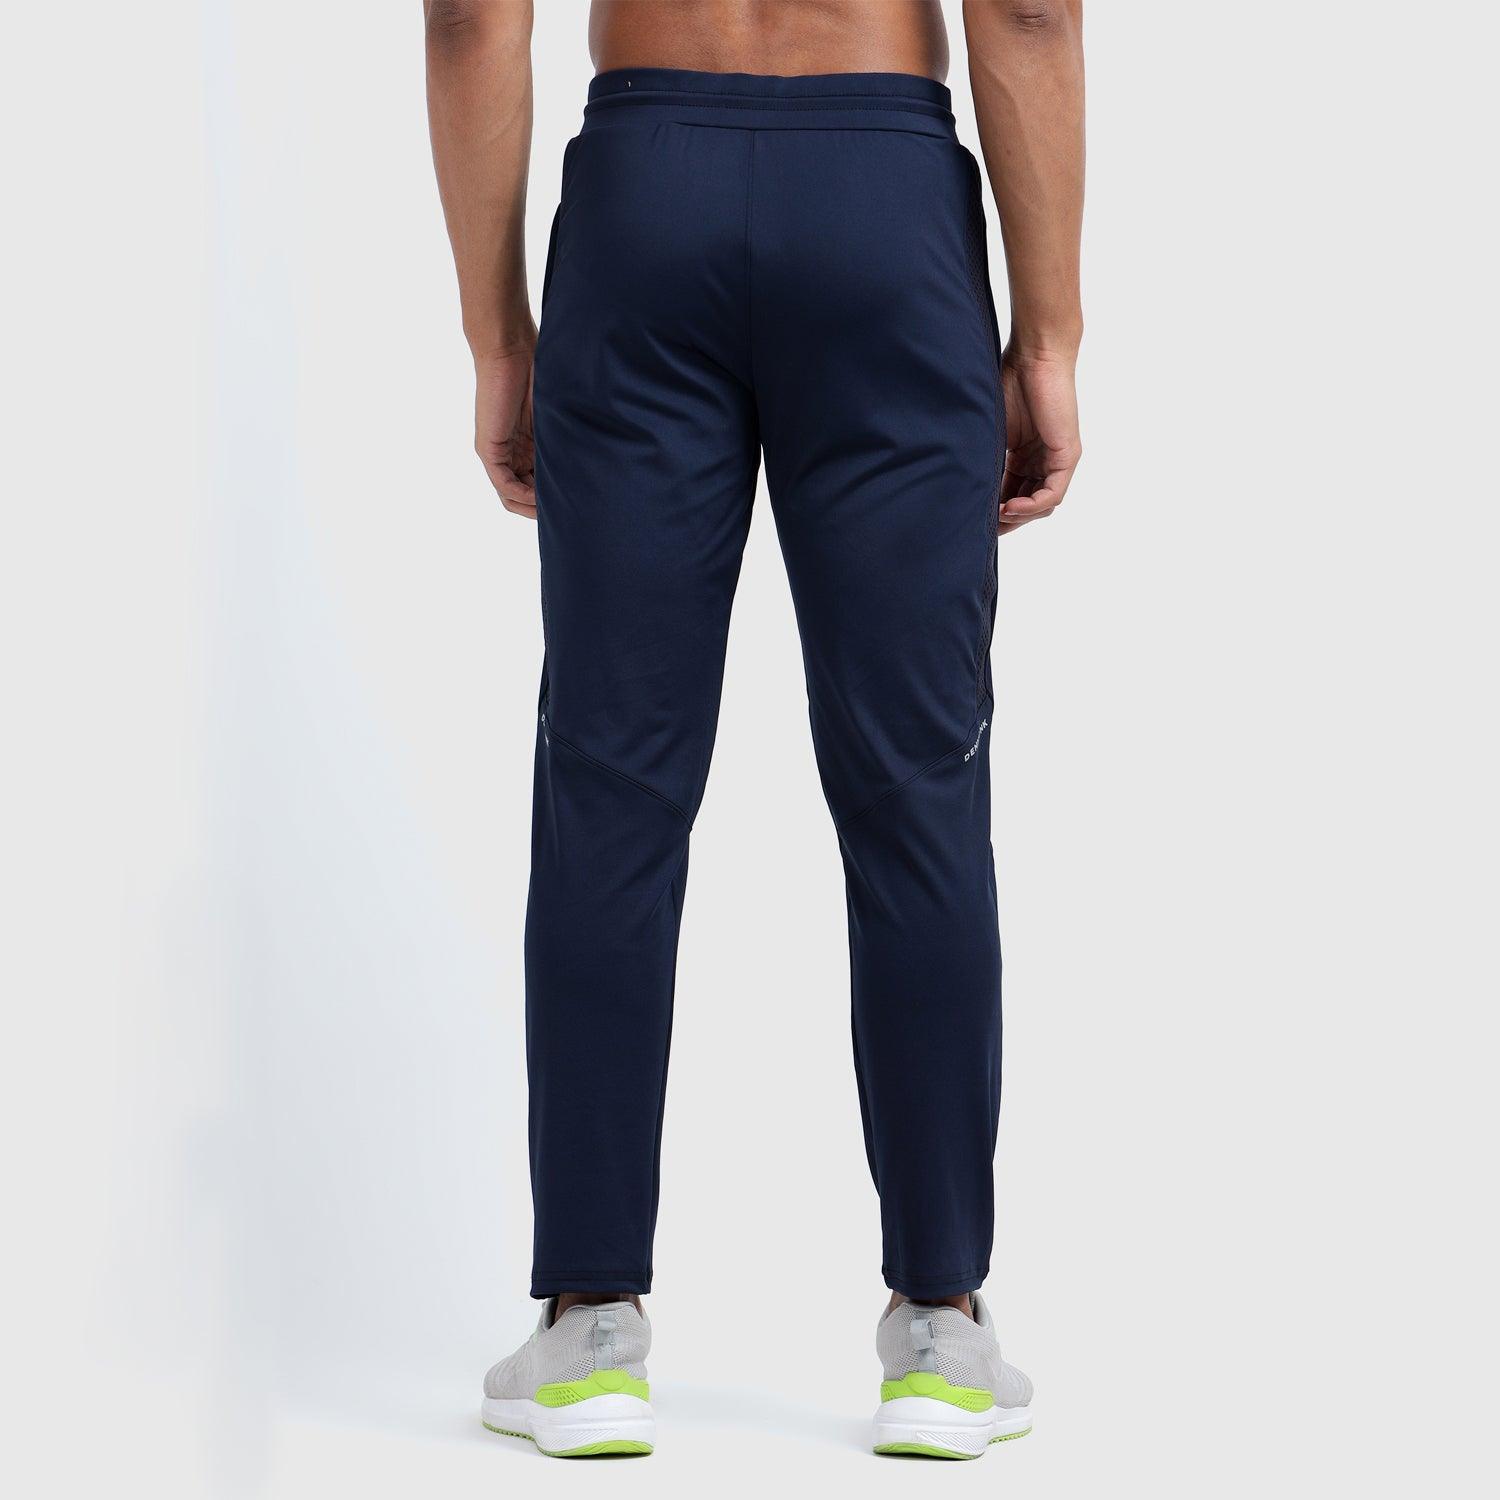 Denmonk: Elevate your look with these Urbanstribe sharp midnight navy joggers for mens.